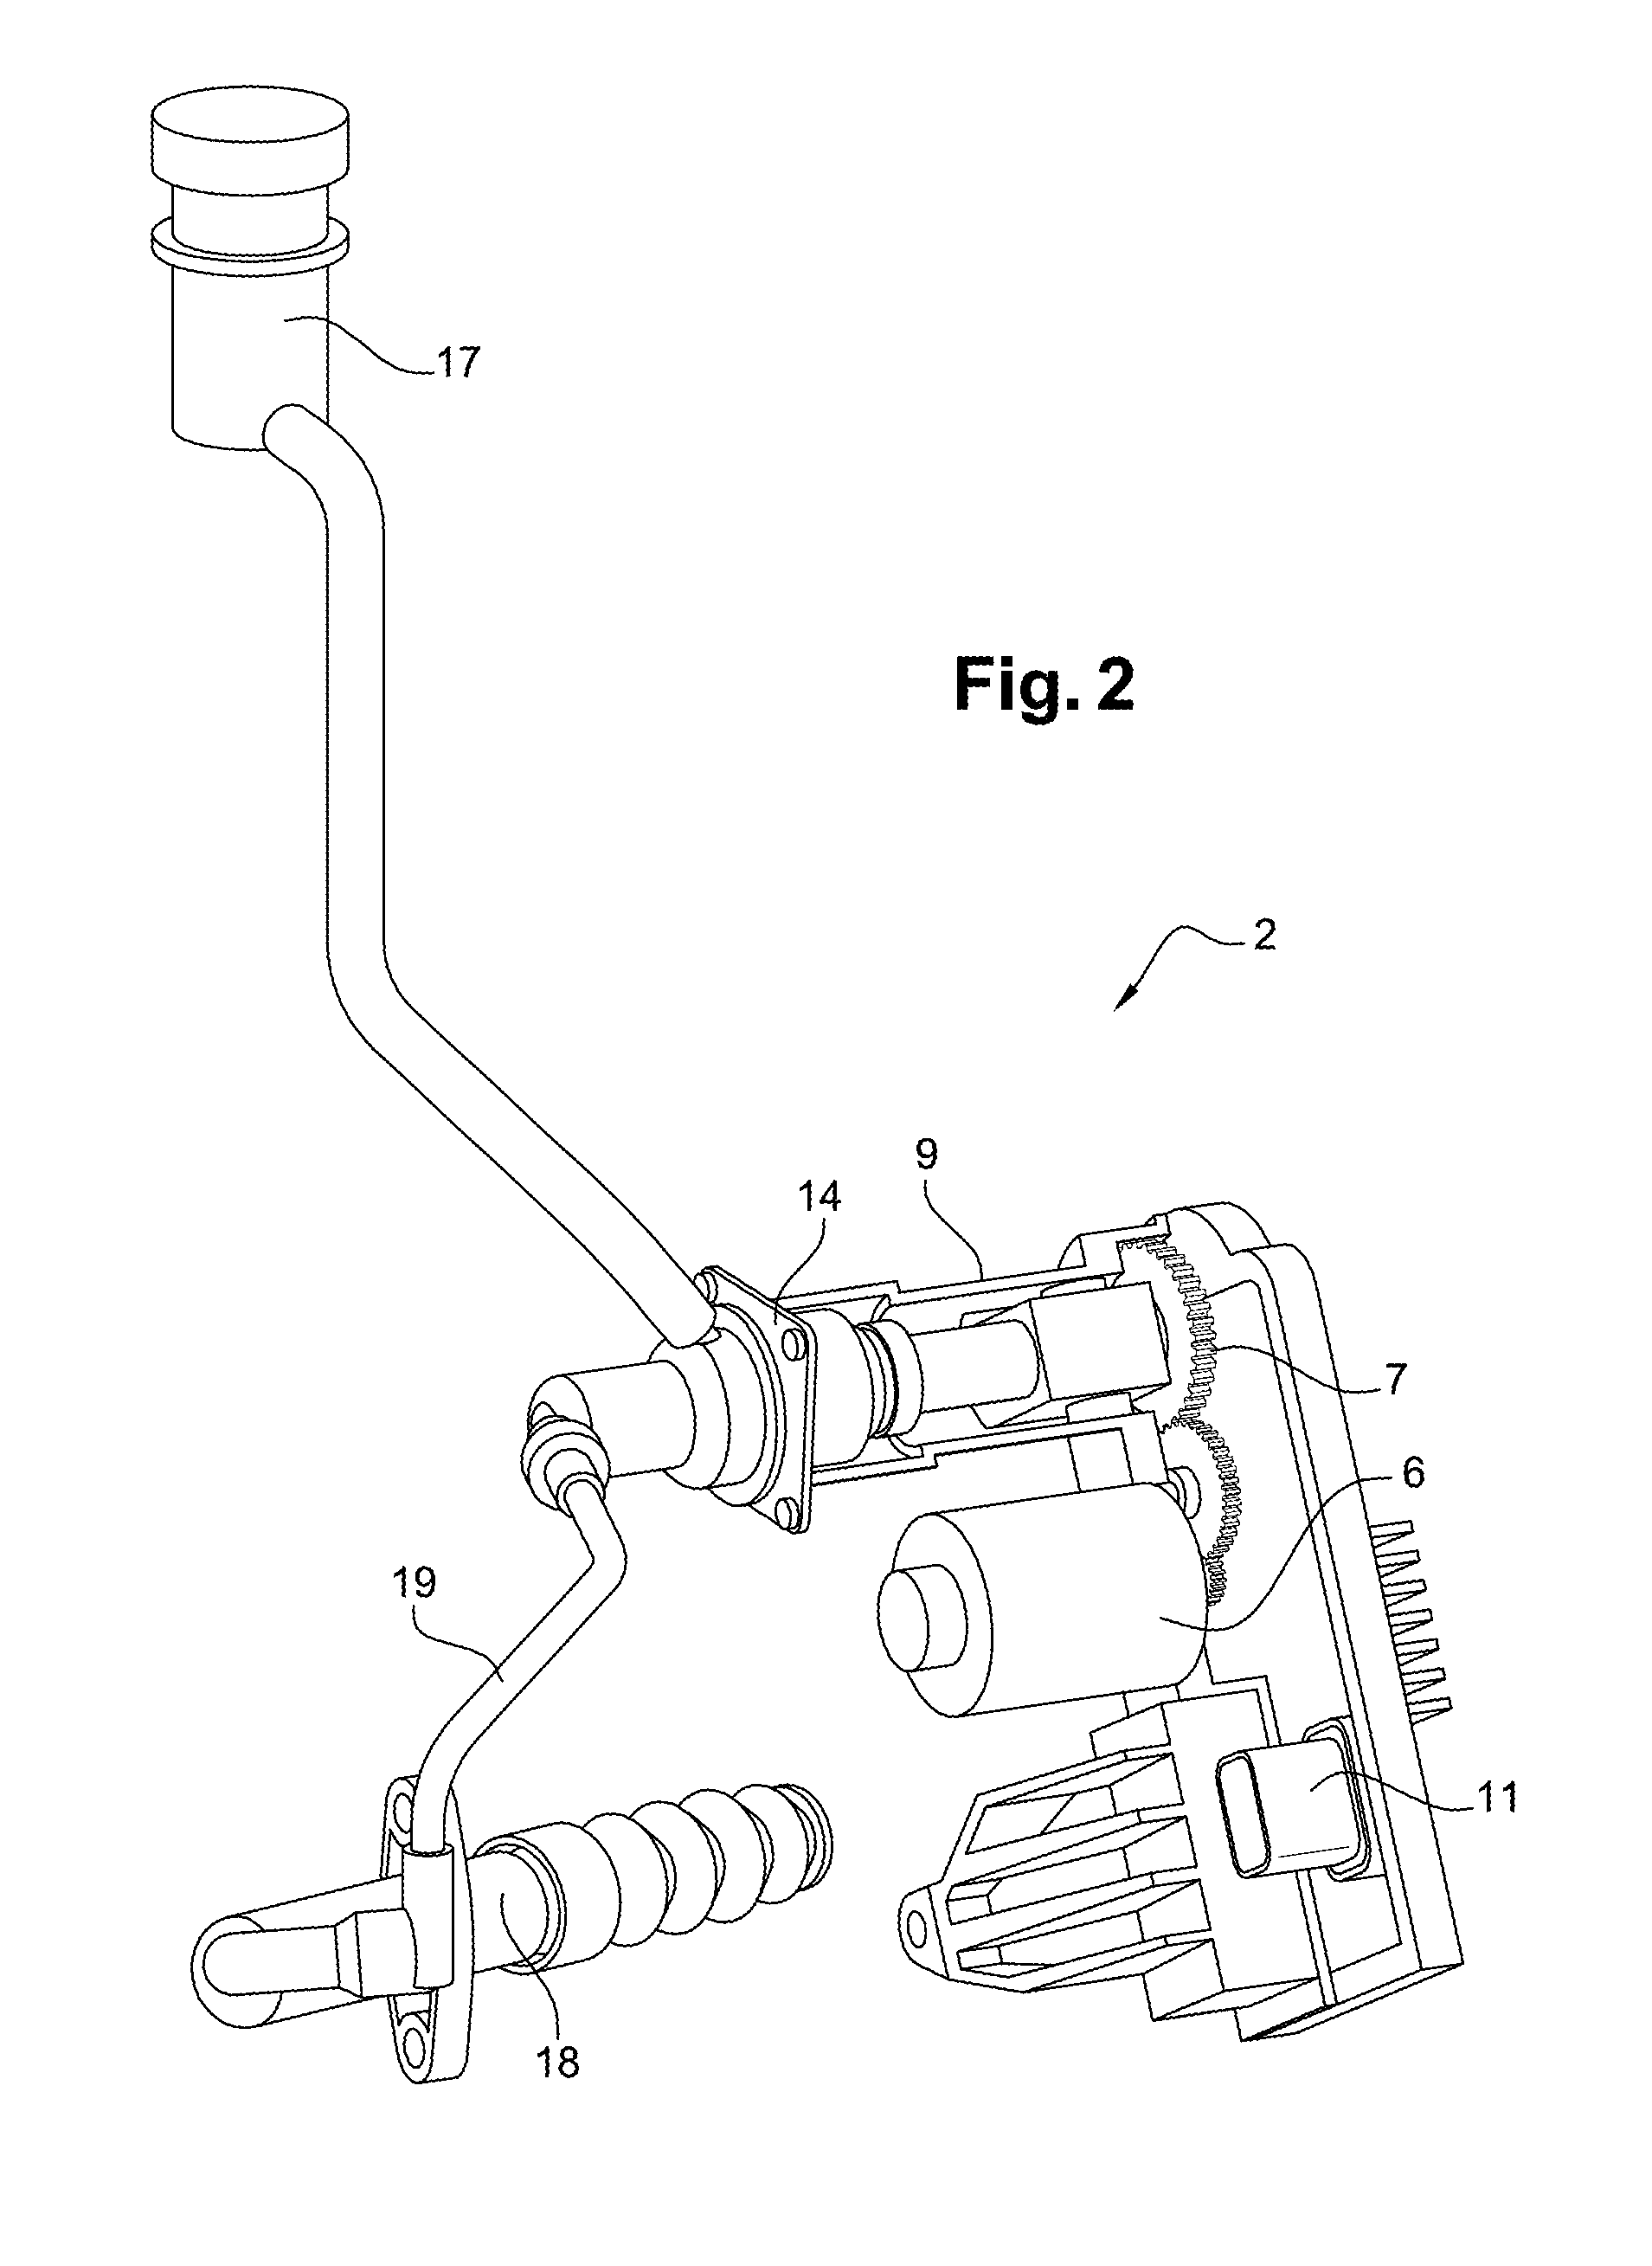 Electrical actuator for vehicle transmission system